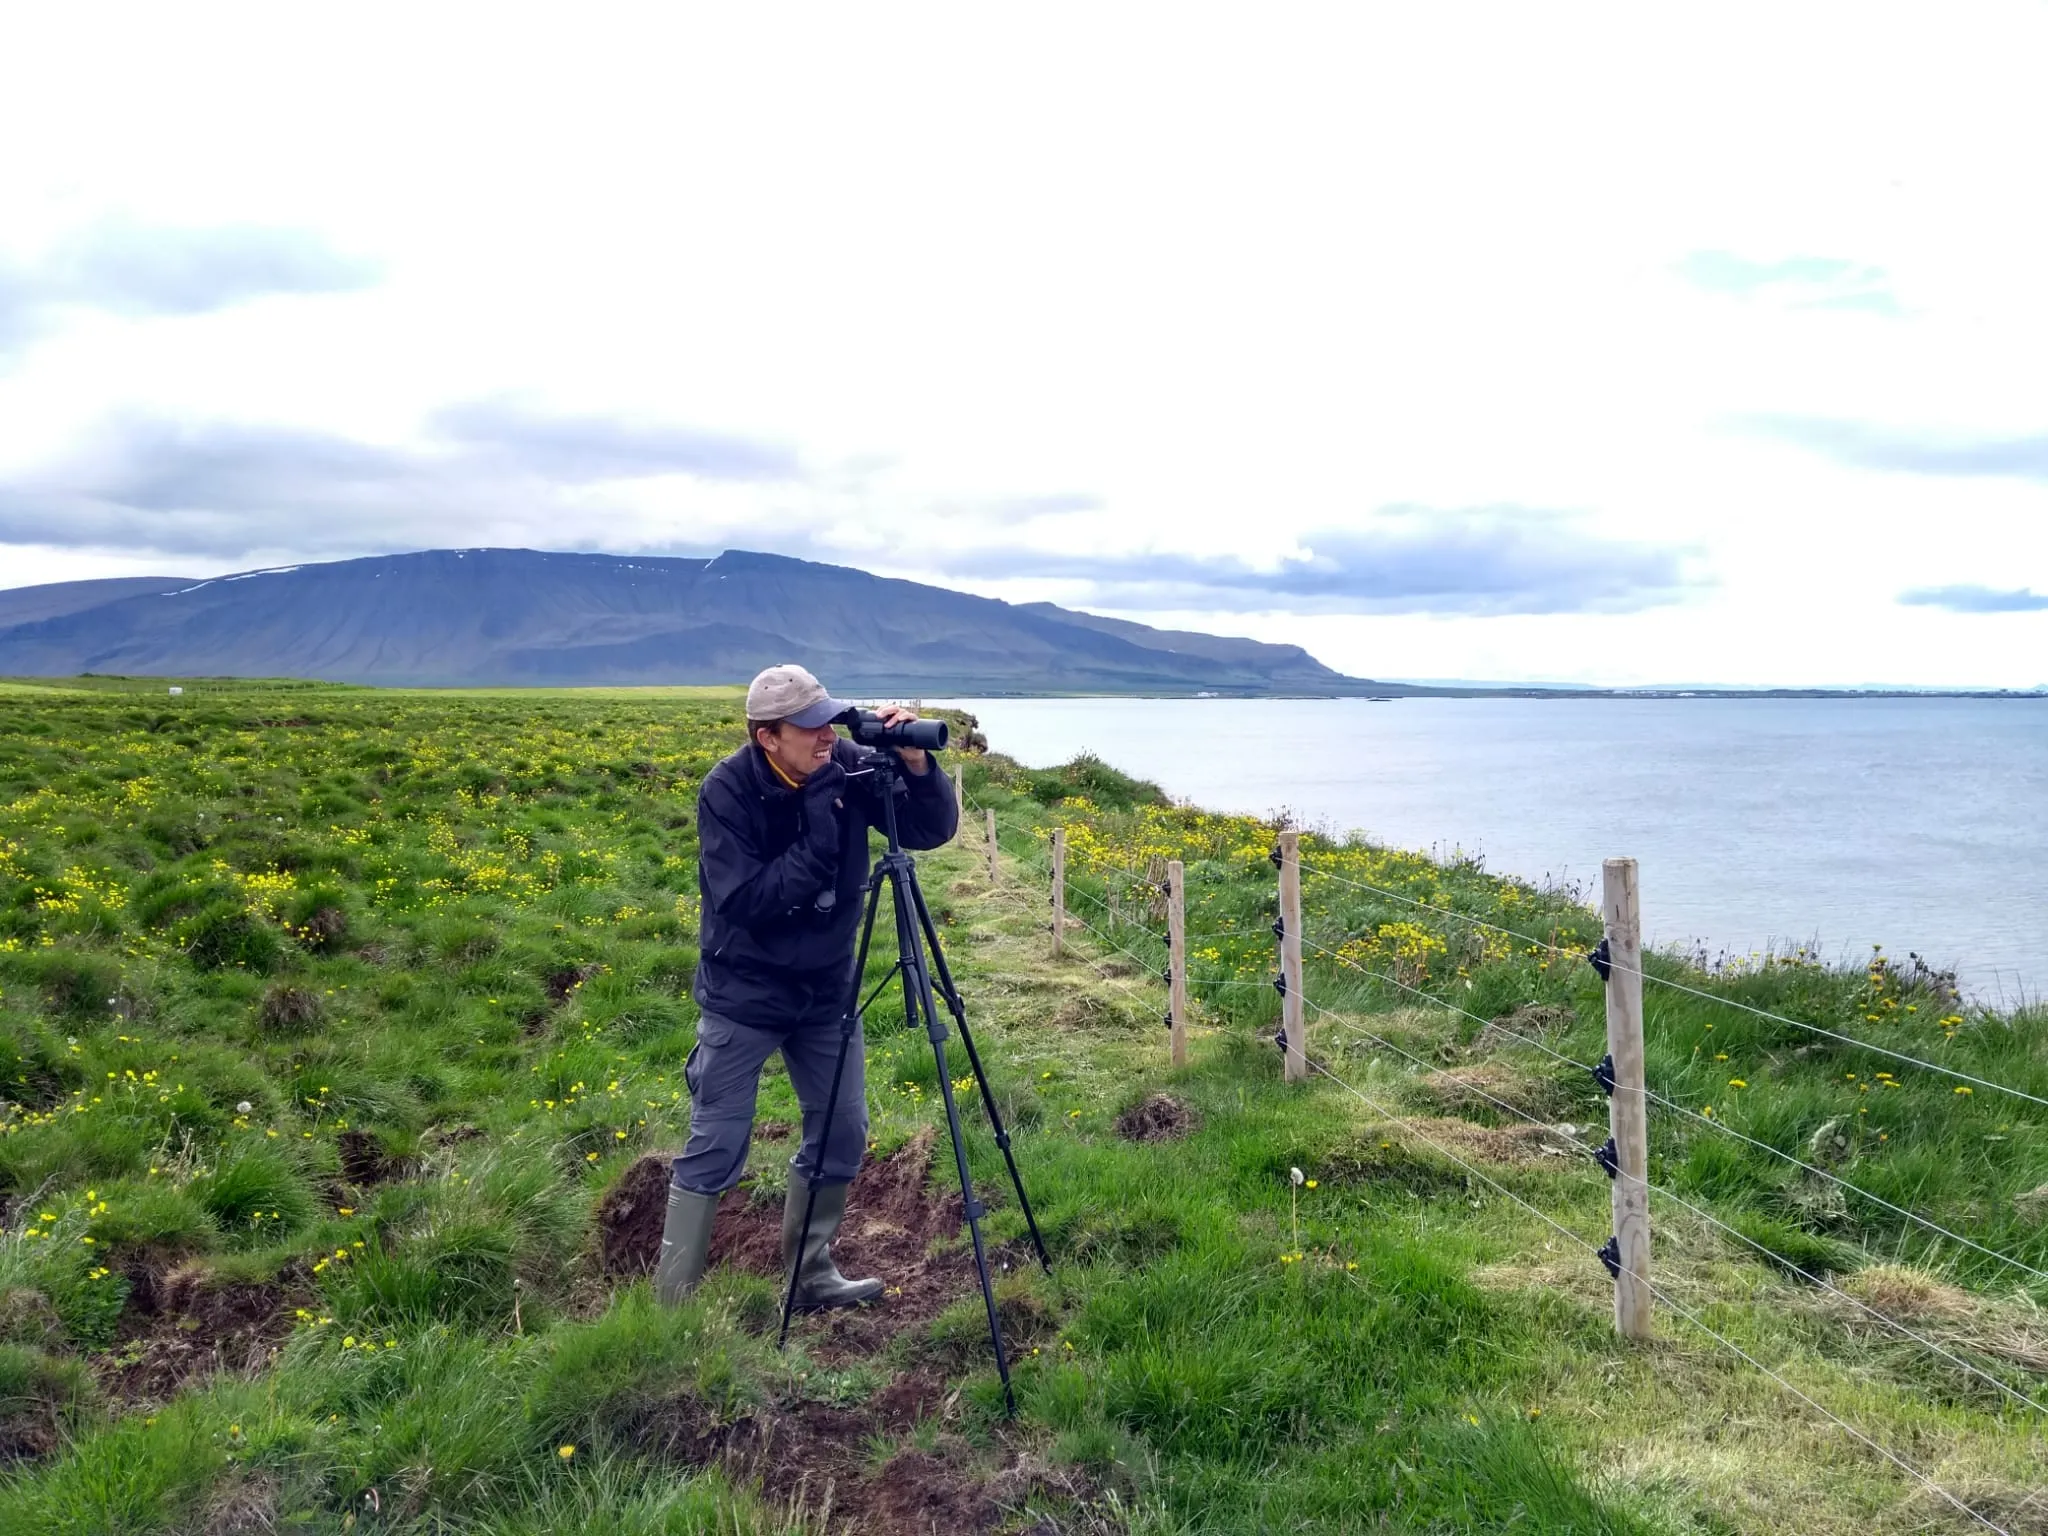 A researcher wearing a cap looks through a monoscope standing in a field in front of a fence, by the sea.